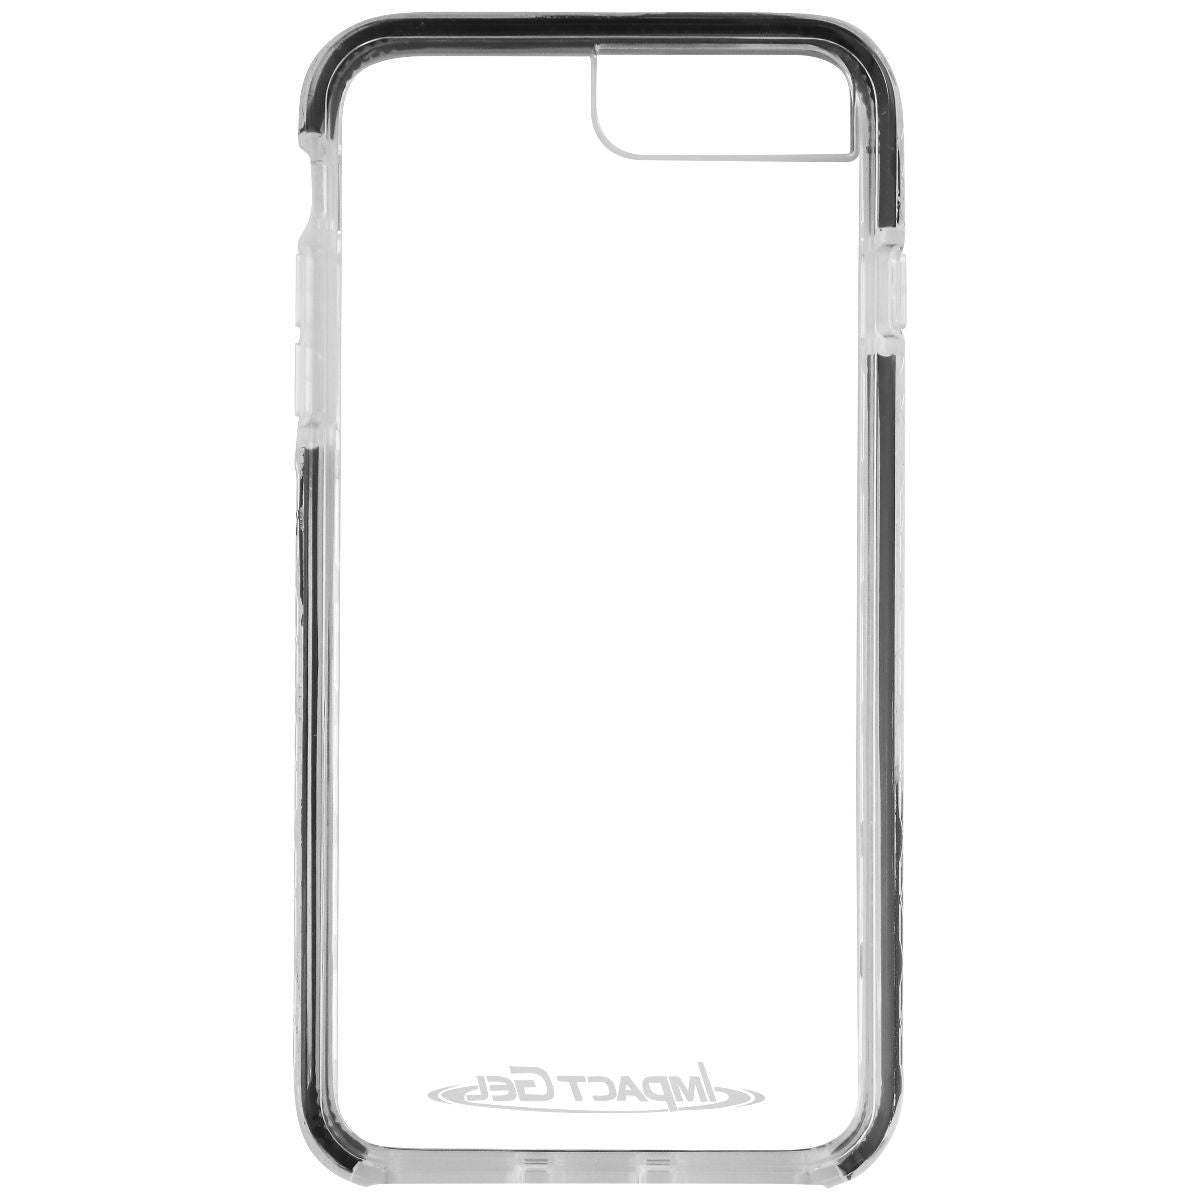 Impact Gel Crusader Lite Series Gel Case for iPhone 8 Plus/7 Plus - Clear/Black Cell Phone - Cases, Covers & Skins Impact Gel    - Simple Cell Bulk Wholesale Pricing - USA Seller